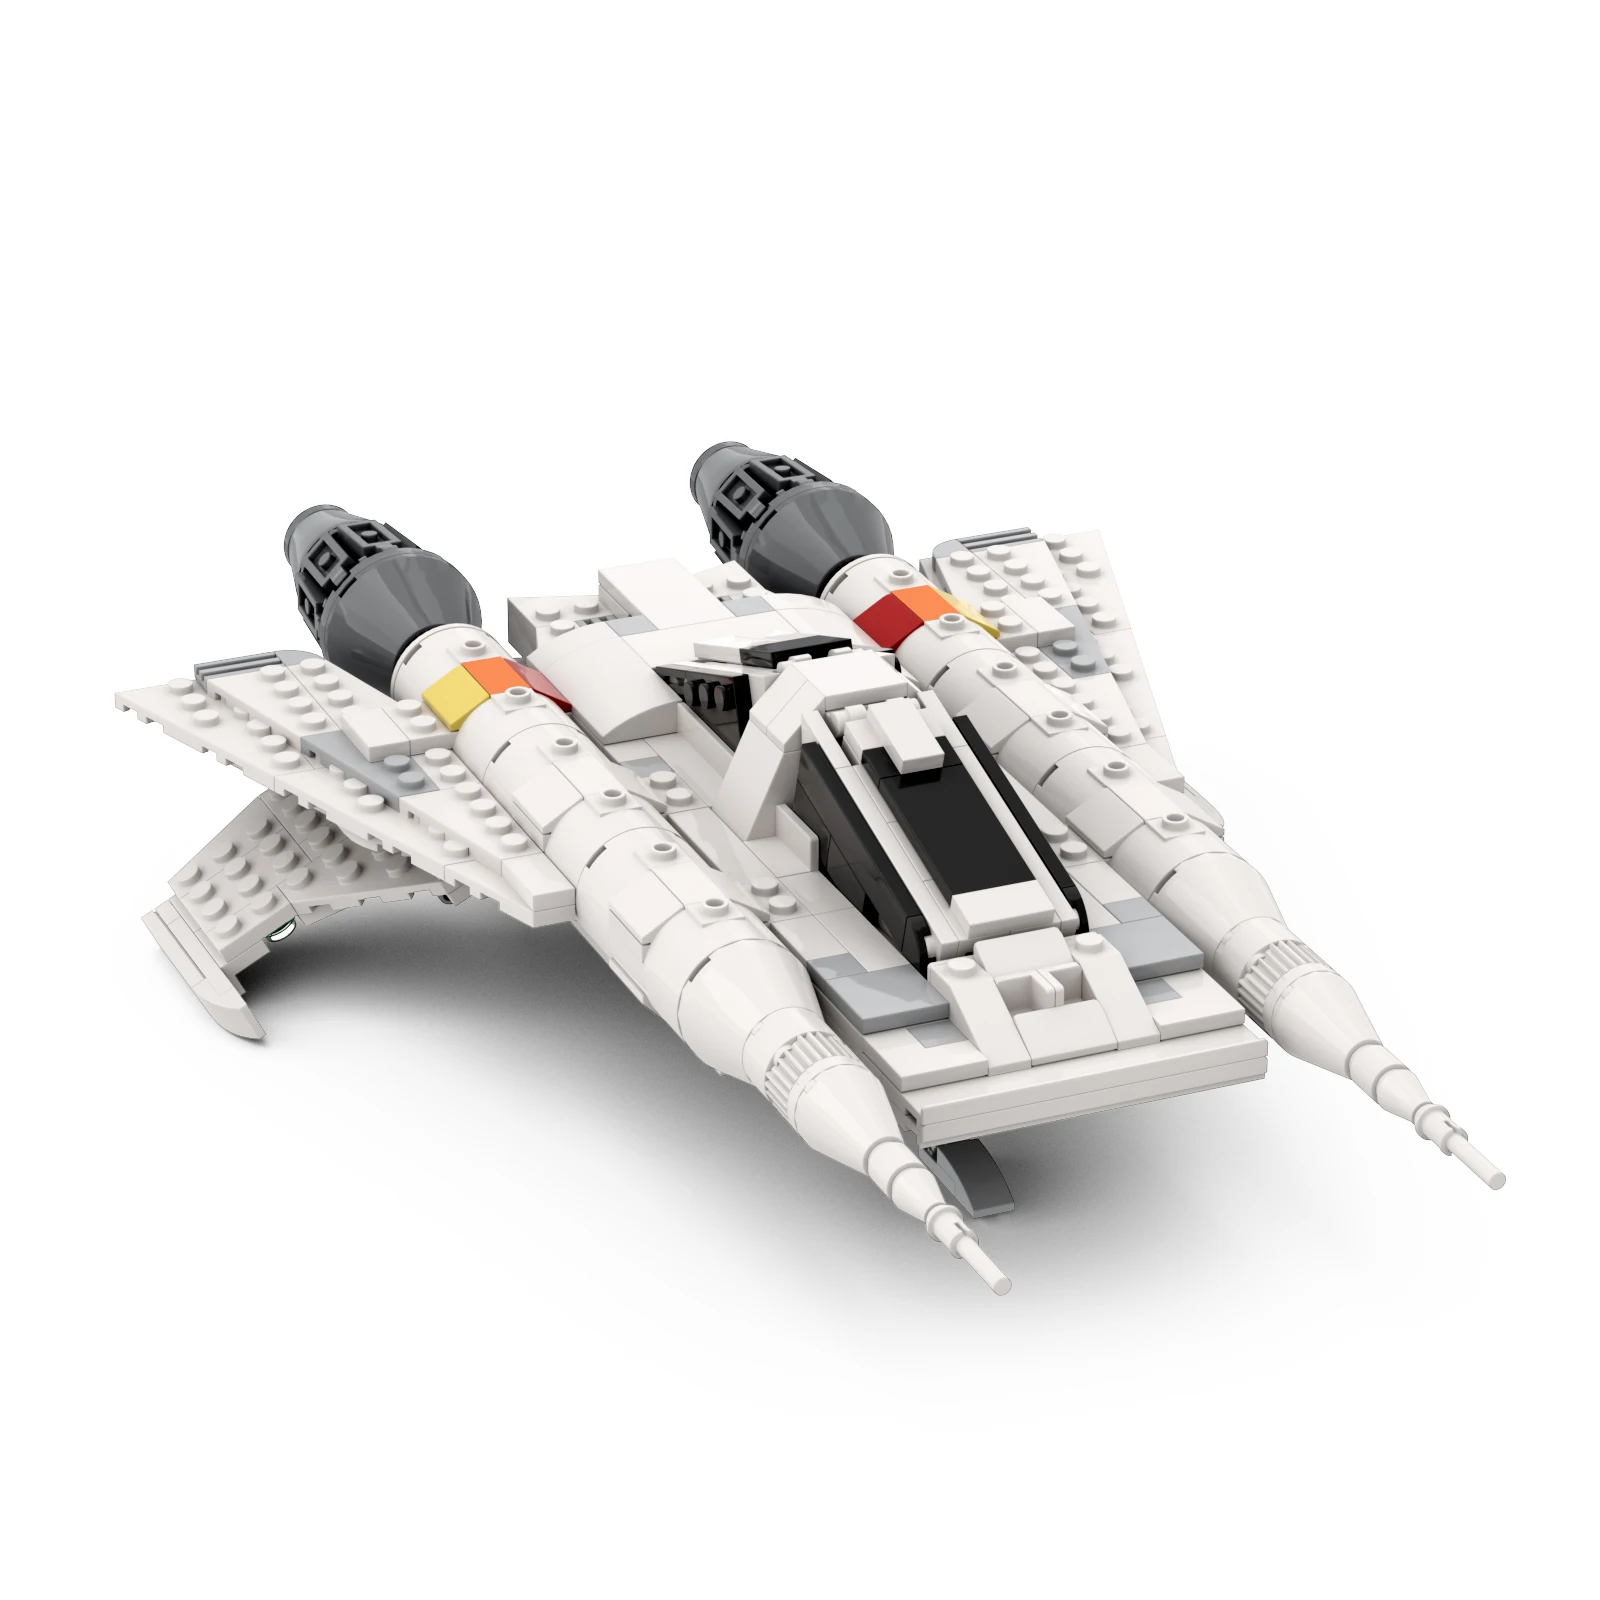 

MOC-48610 Space Fighter Ship Spaceship Building Blocks Mini ISSD Destroyer Kit Imperial Aircraft Brick Model DIY Kid Toy Gifts